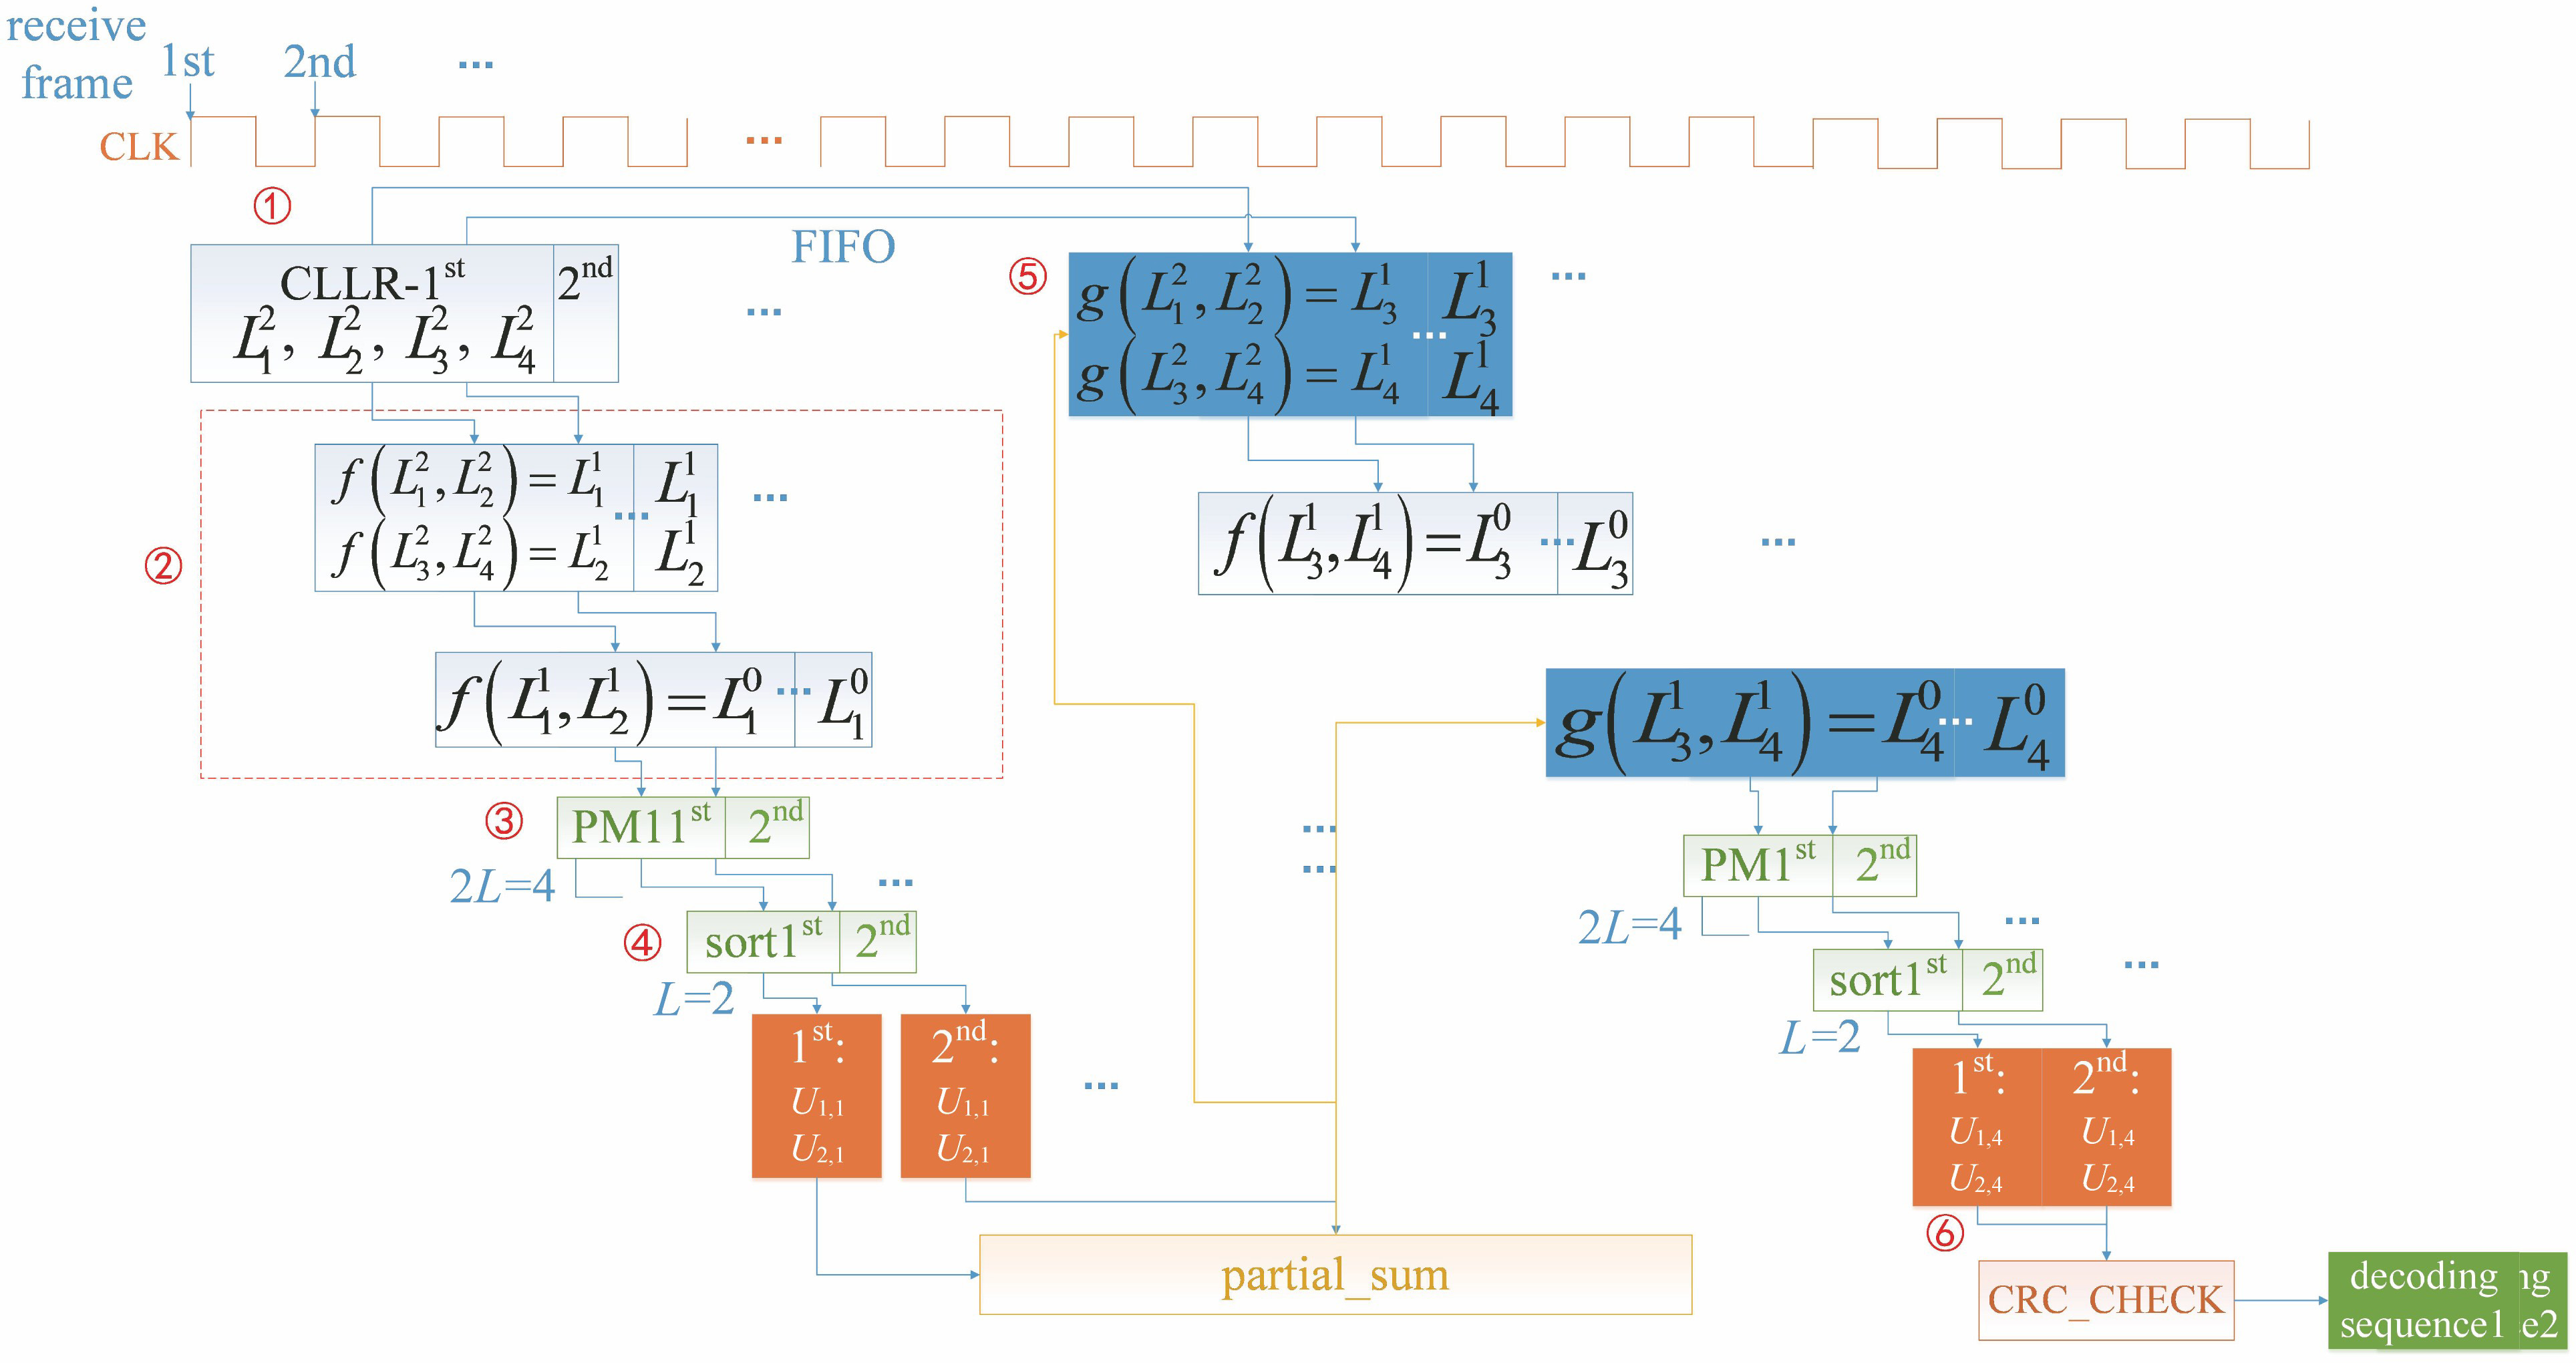 Decoding flow chart of N=4 polar codes based on fully-unrolled pipeline architecture